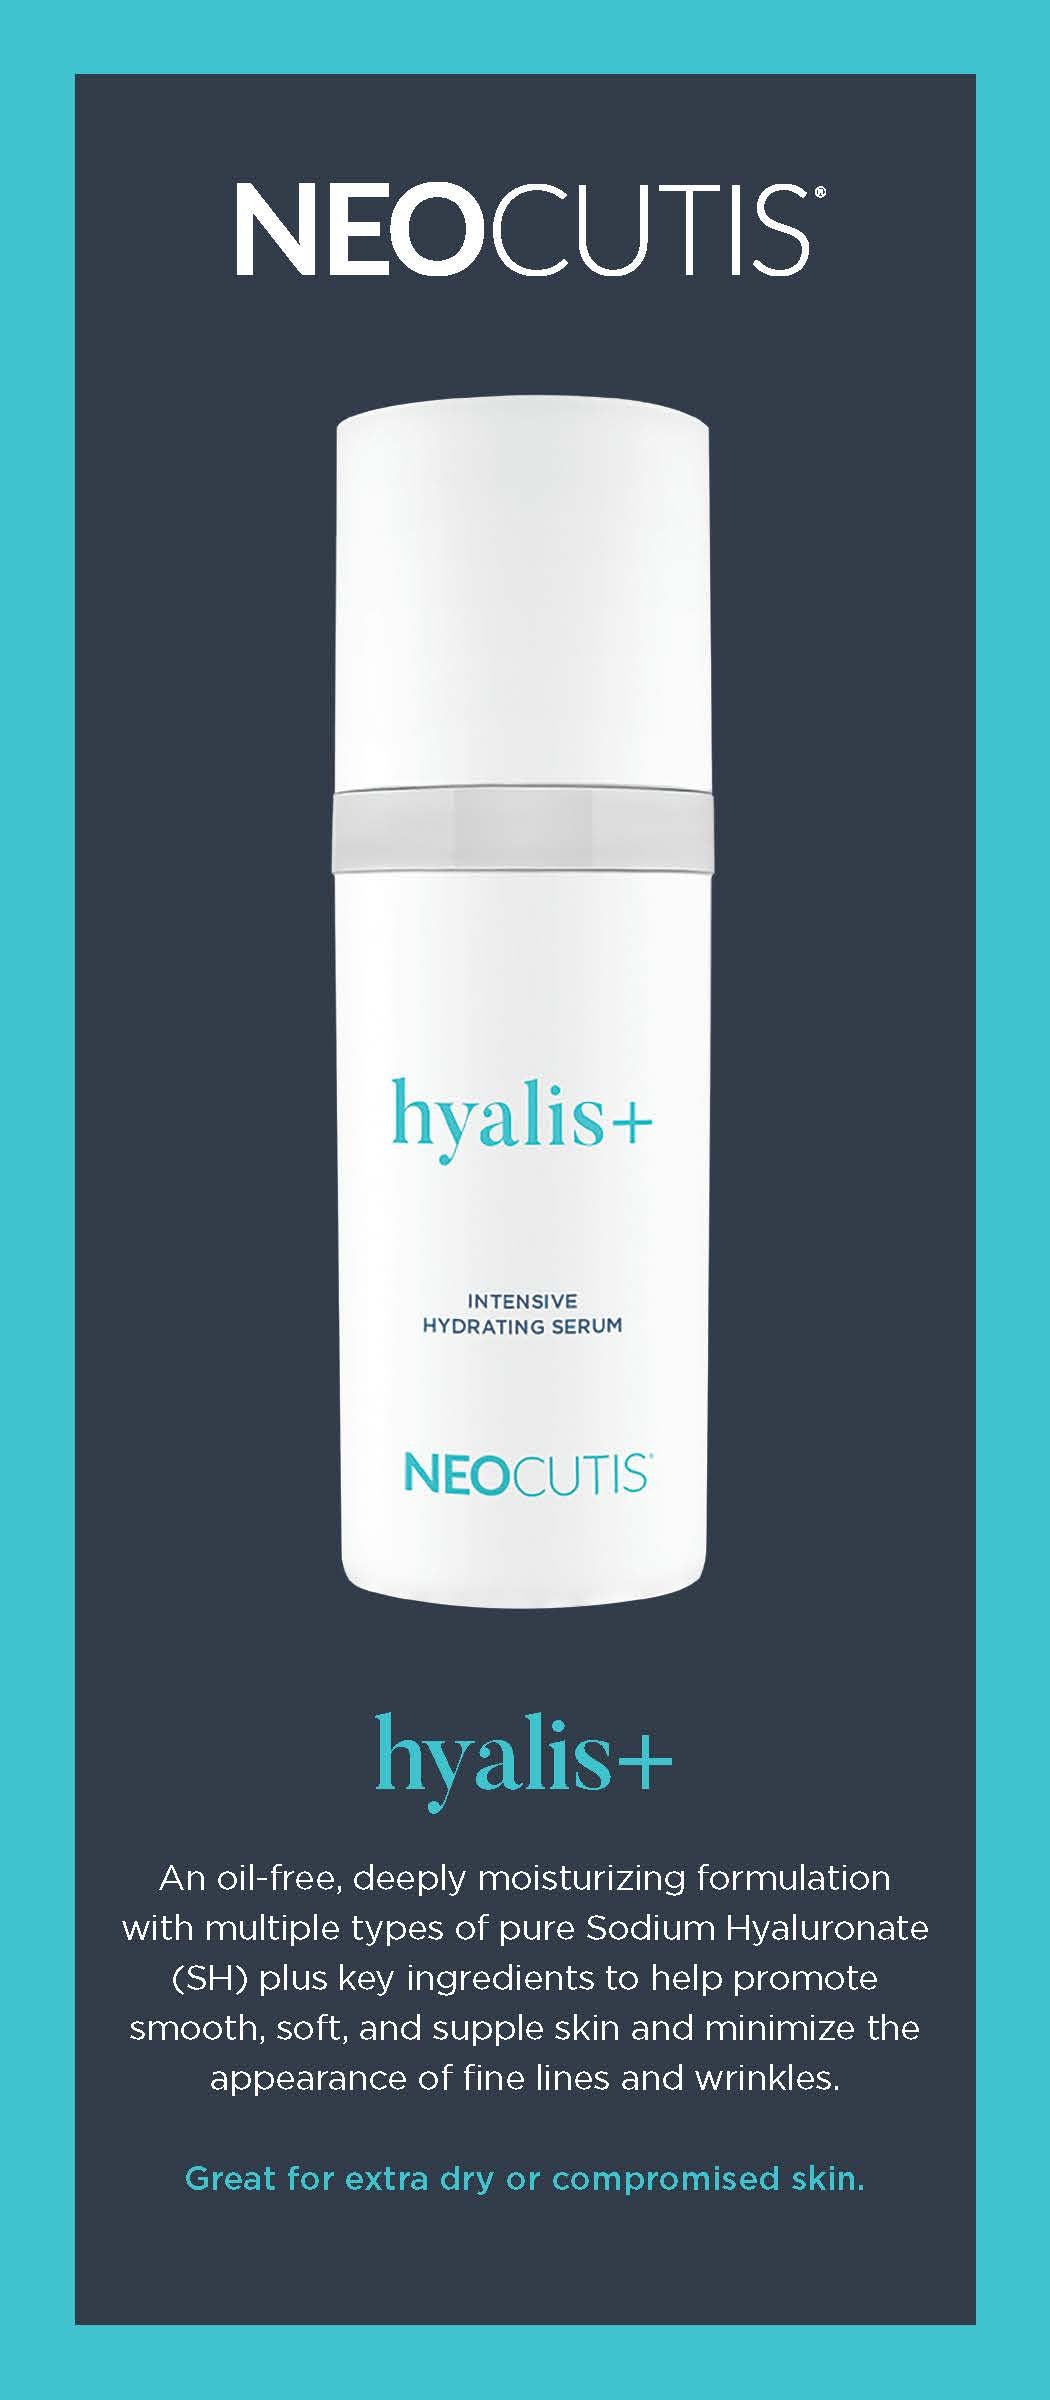 NEOCUTIS Hyalis+ | Intensive Hydrating Serum | 1 Oz | 4 Month Supply | Minimizes appearance of fine lines & wrinkles | Helps increase the level of natural hyaluronic acid in the skin | Dermatologist tested - New and Improved